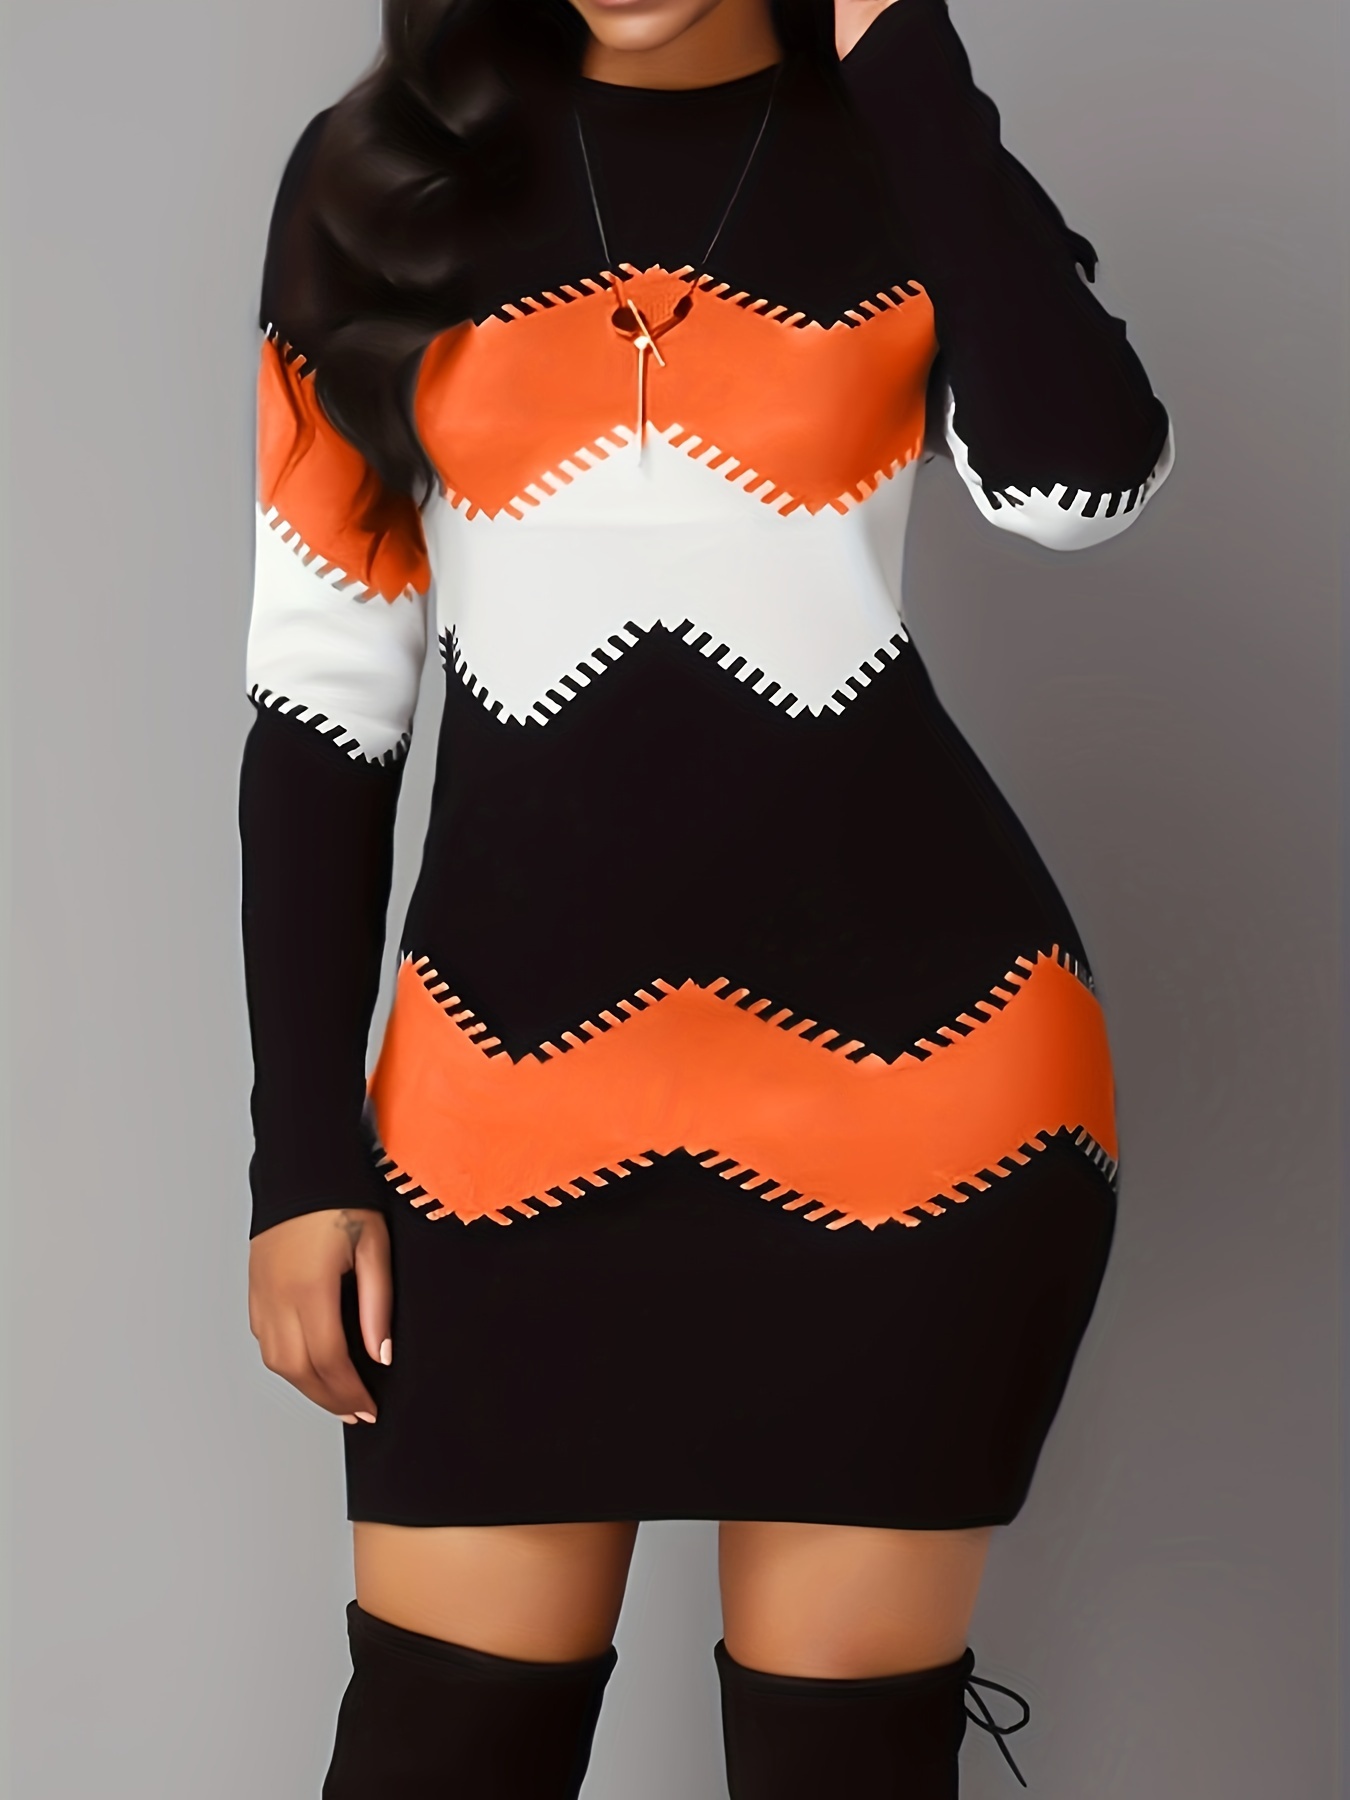 color block simple dress casual long sleeve bodycon mini dress womens clothing details 0